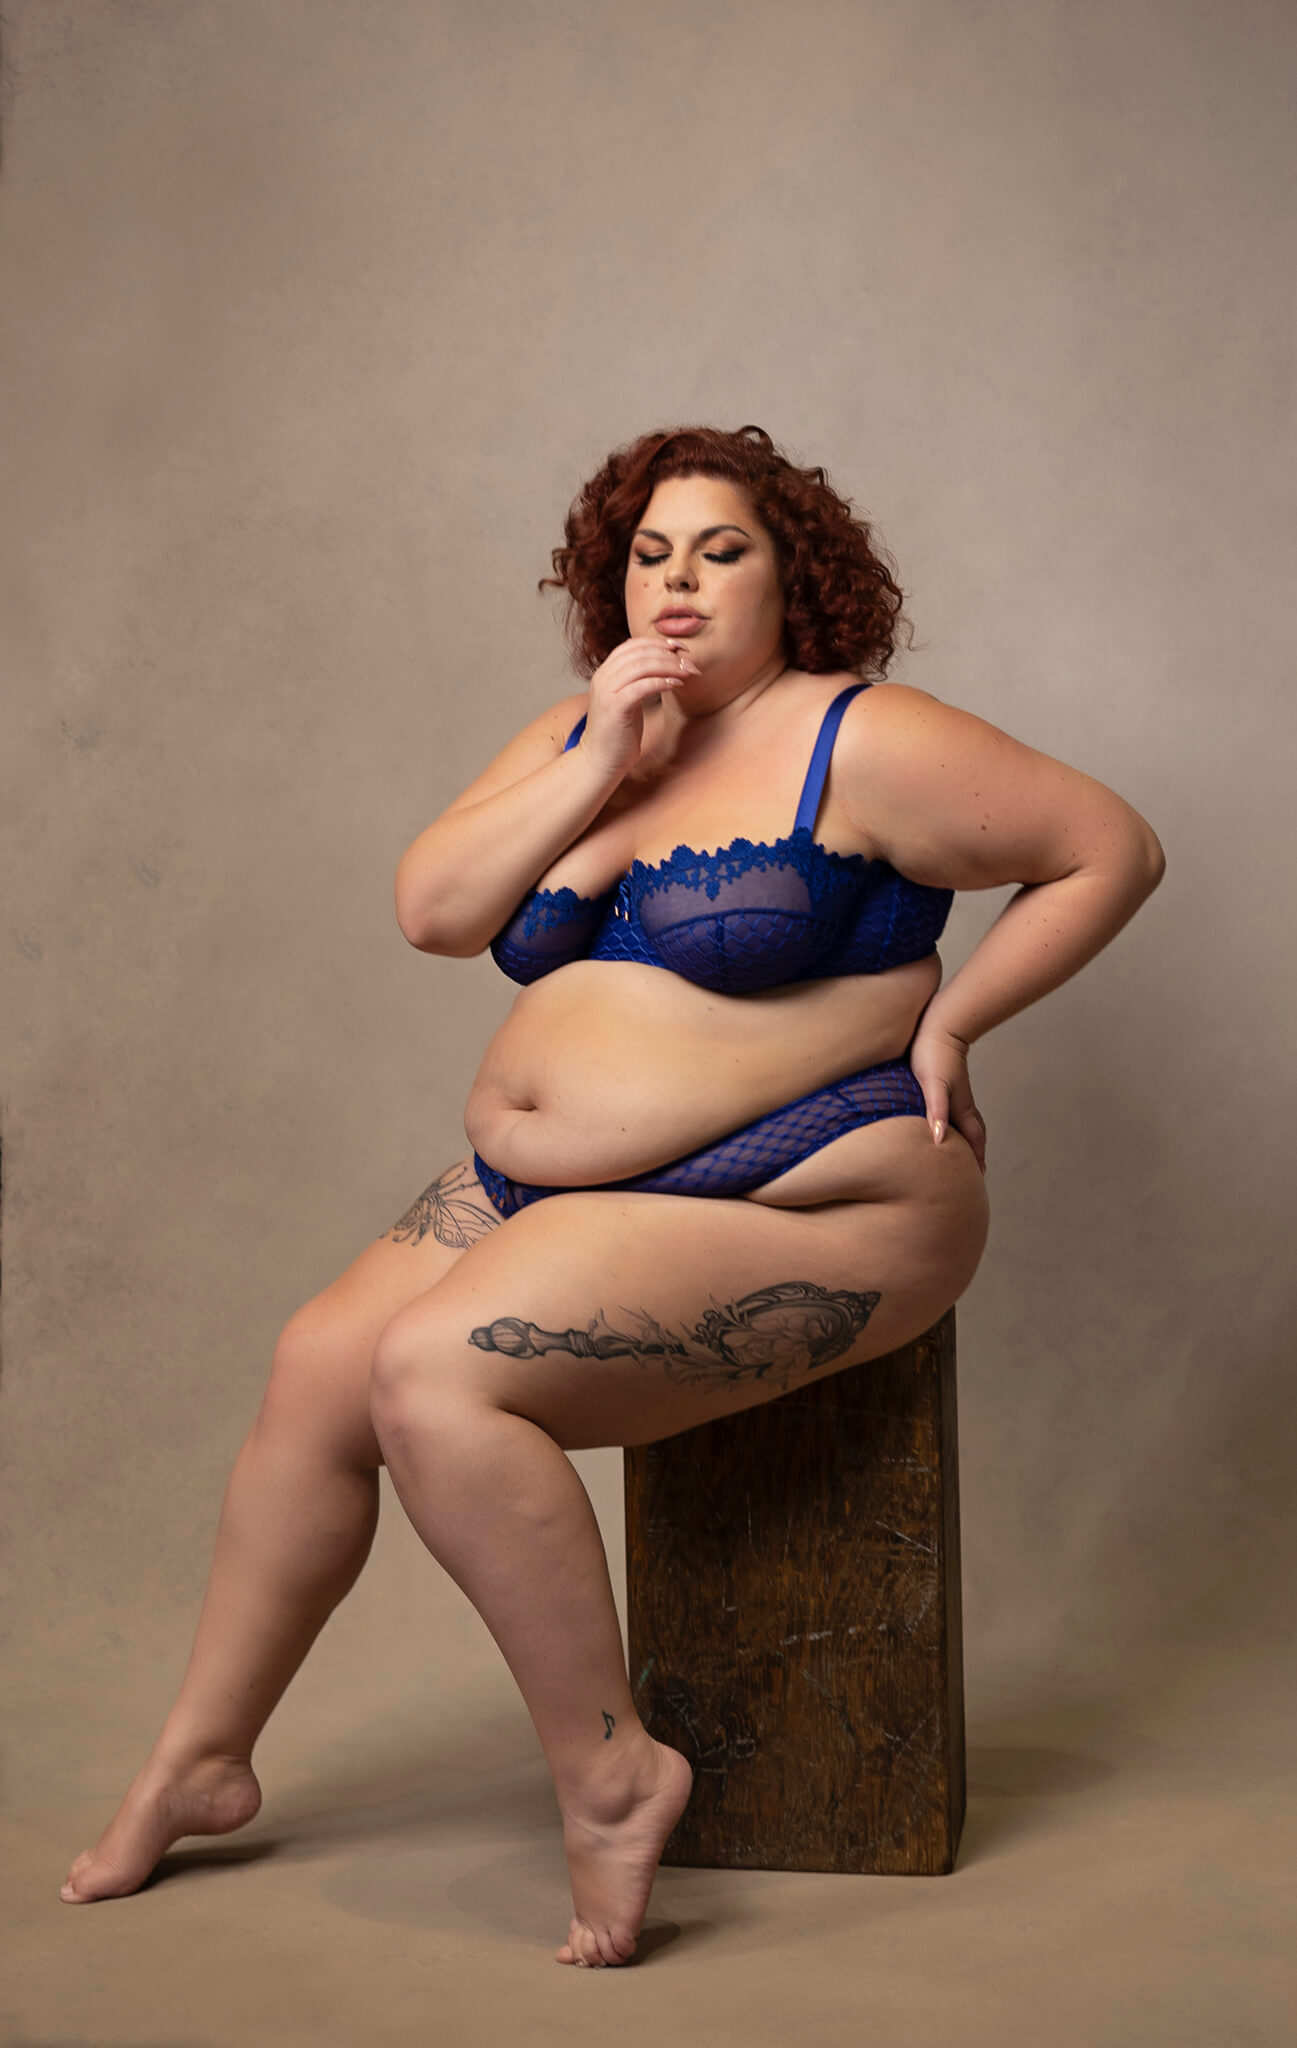 A woman in bright blue lingerie sits on a wooden block in a studio with a hand on her chin after using austin nail salons